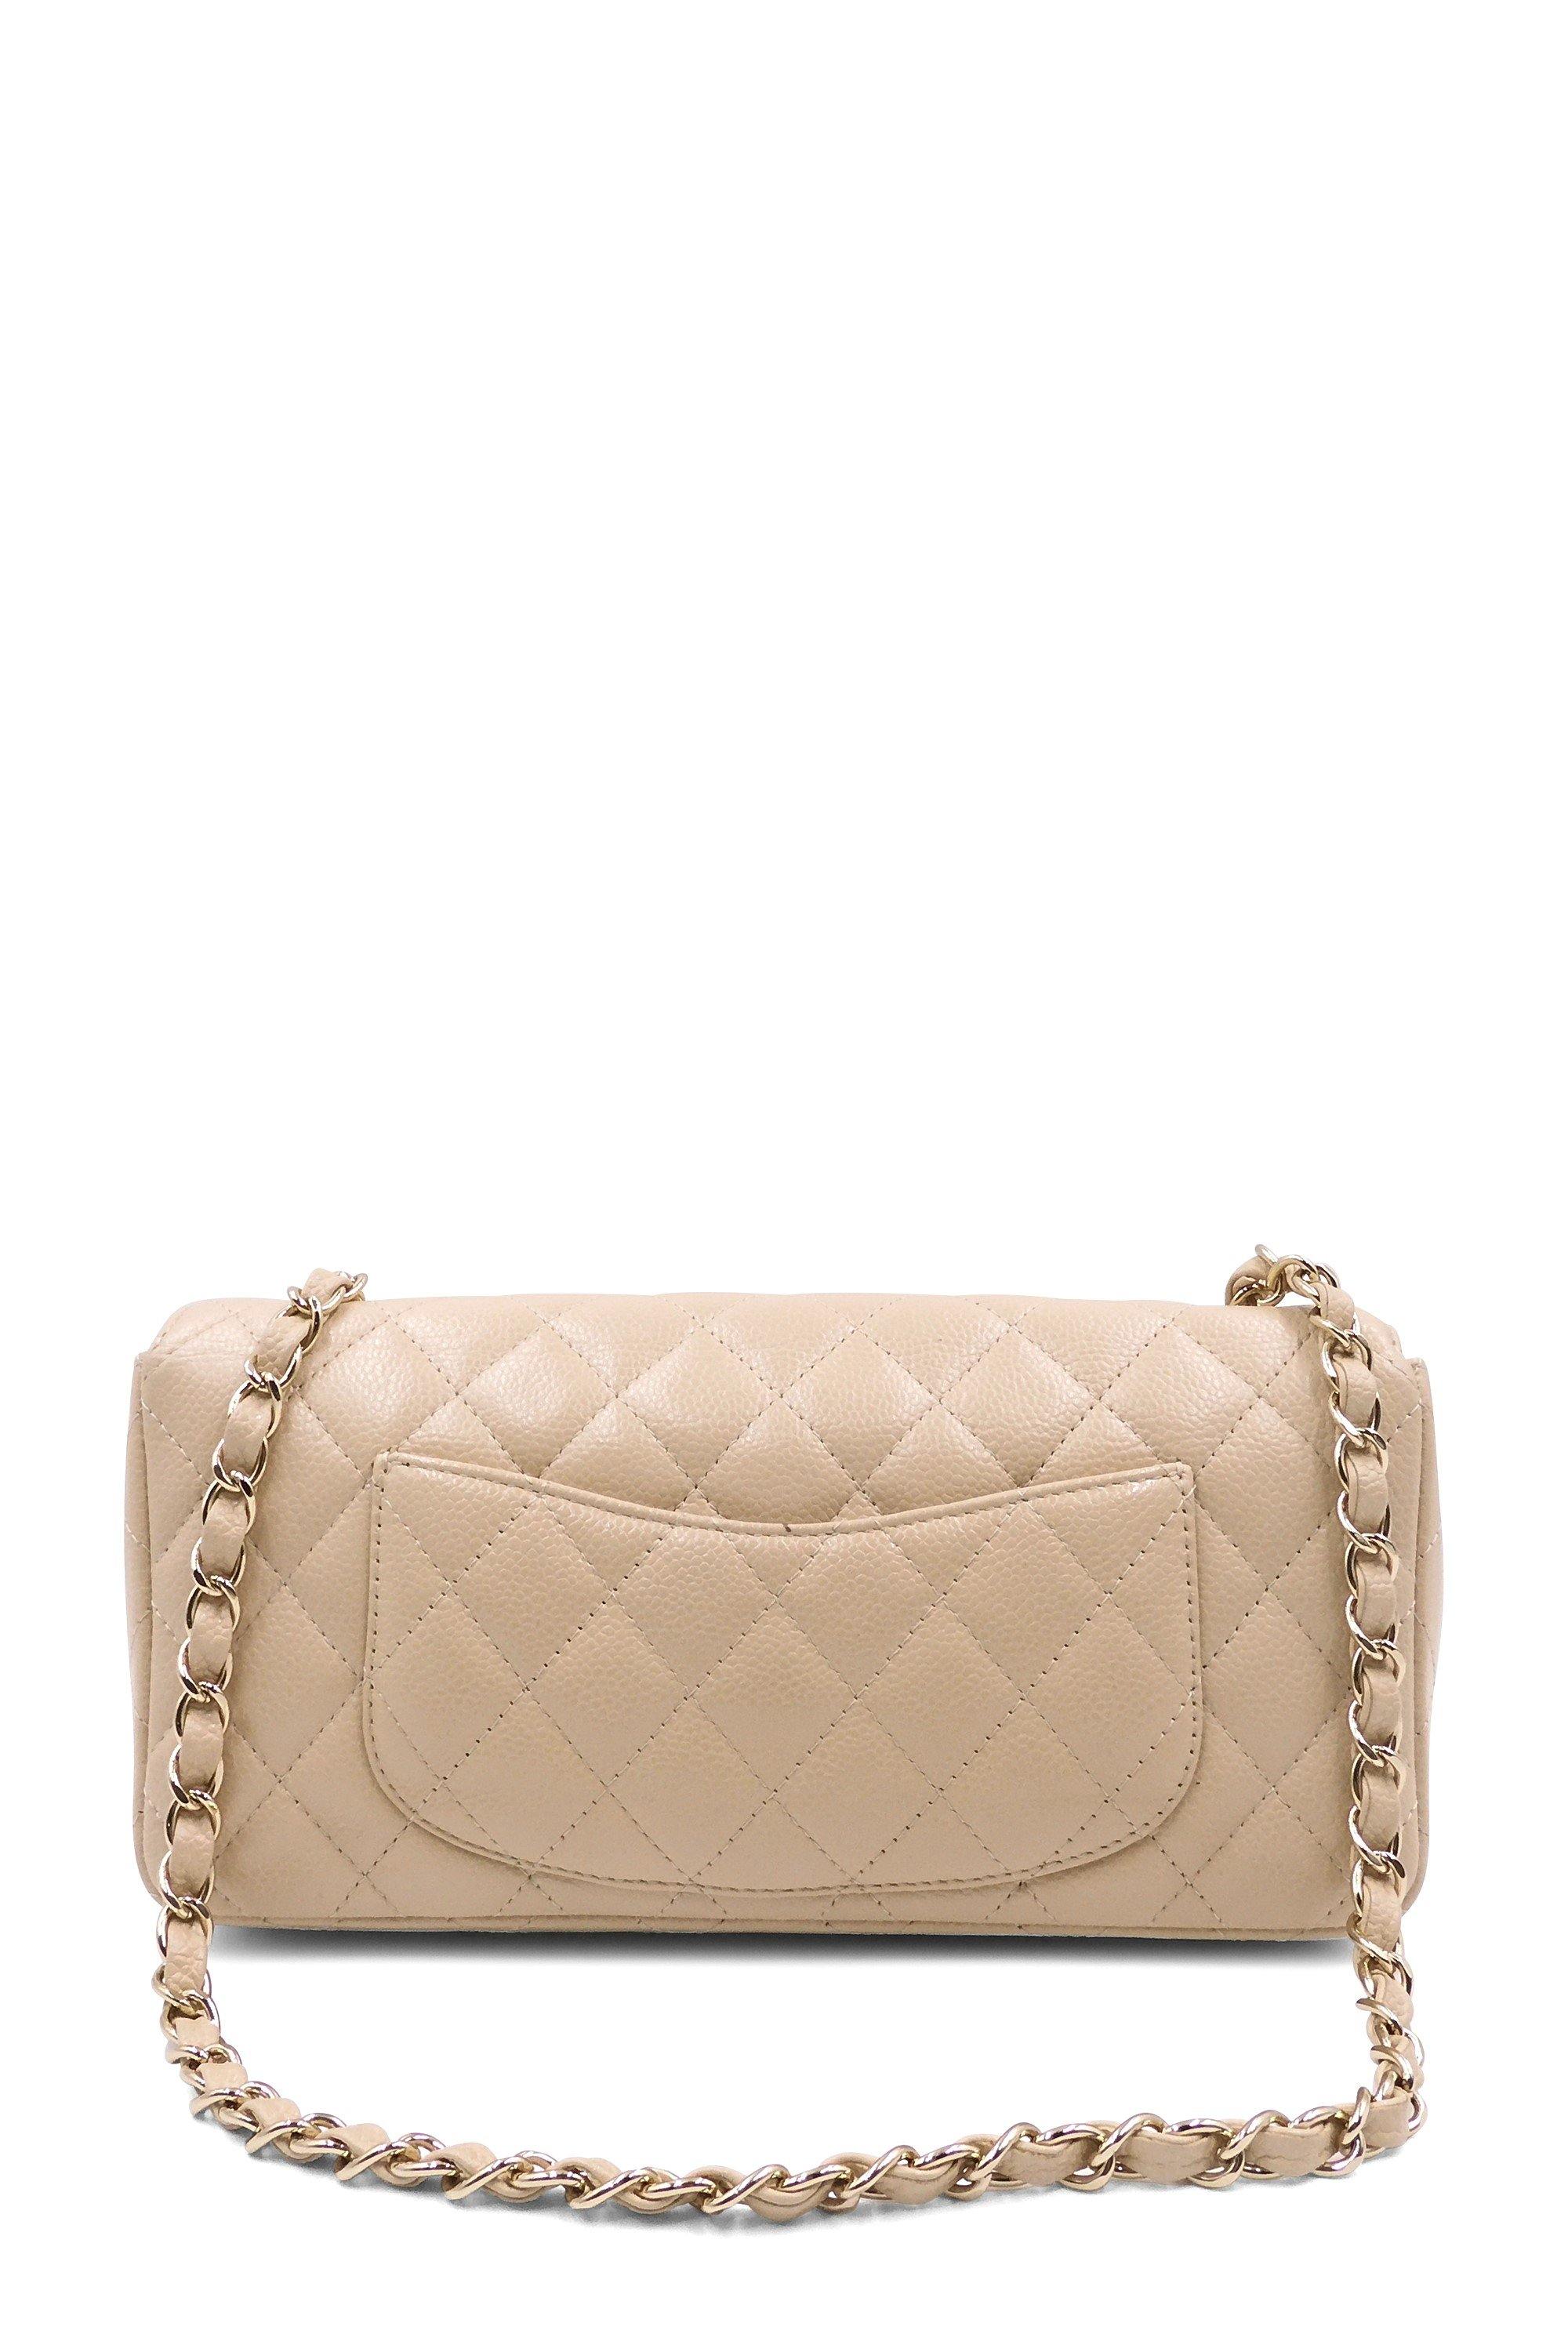 Chanel Camel Beige Quilted Caviar East-West Flap Gold Hardware, 2006-2008  Available For Immediate Sale At Sotheby's